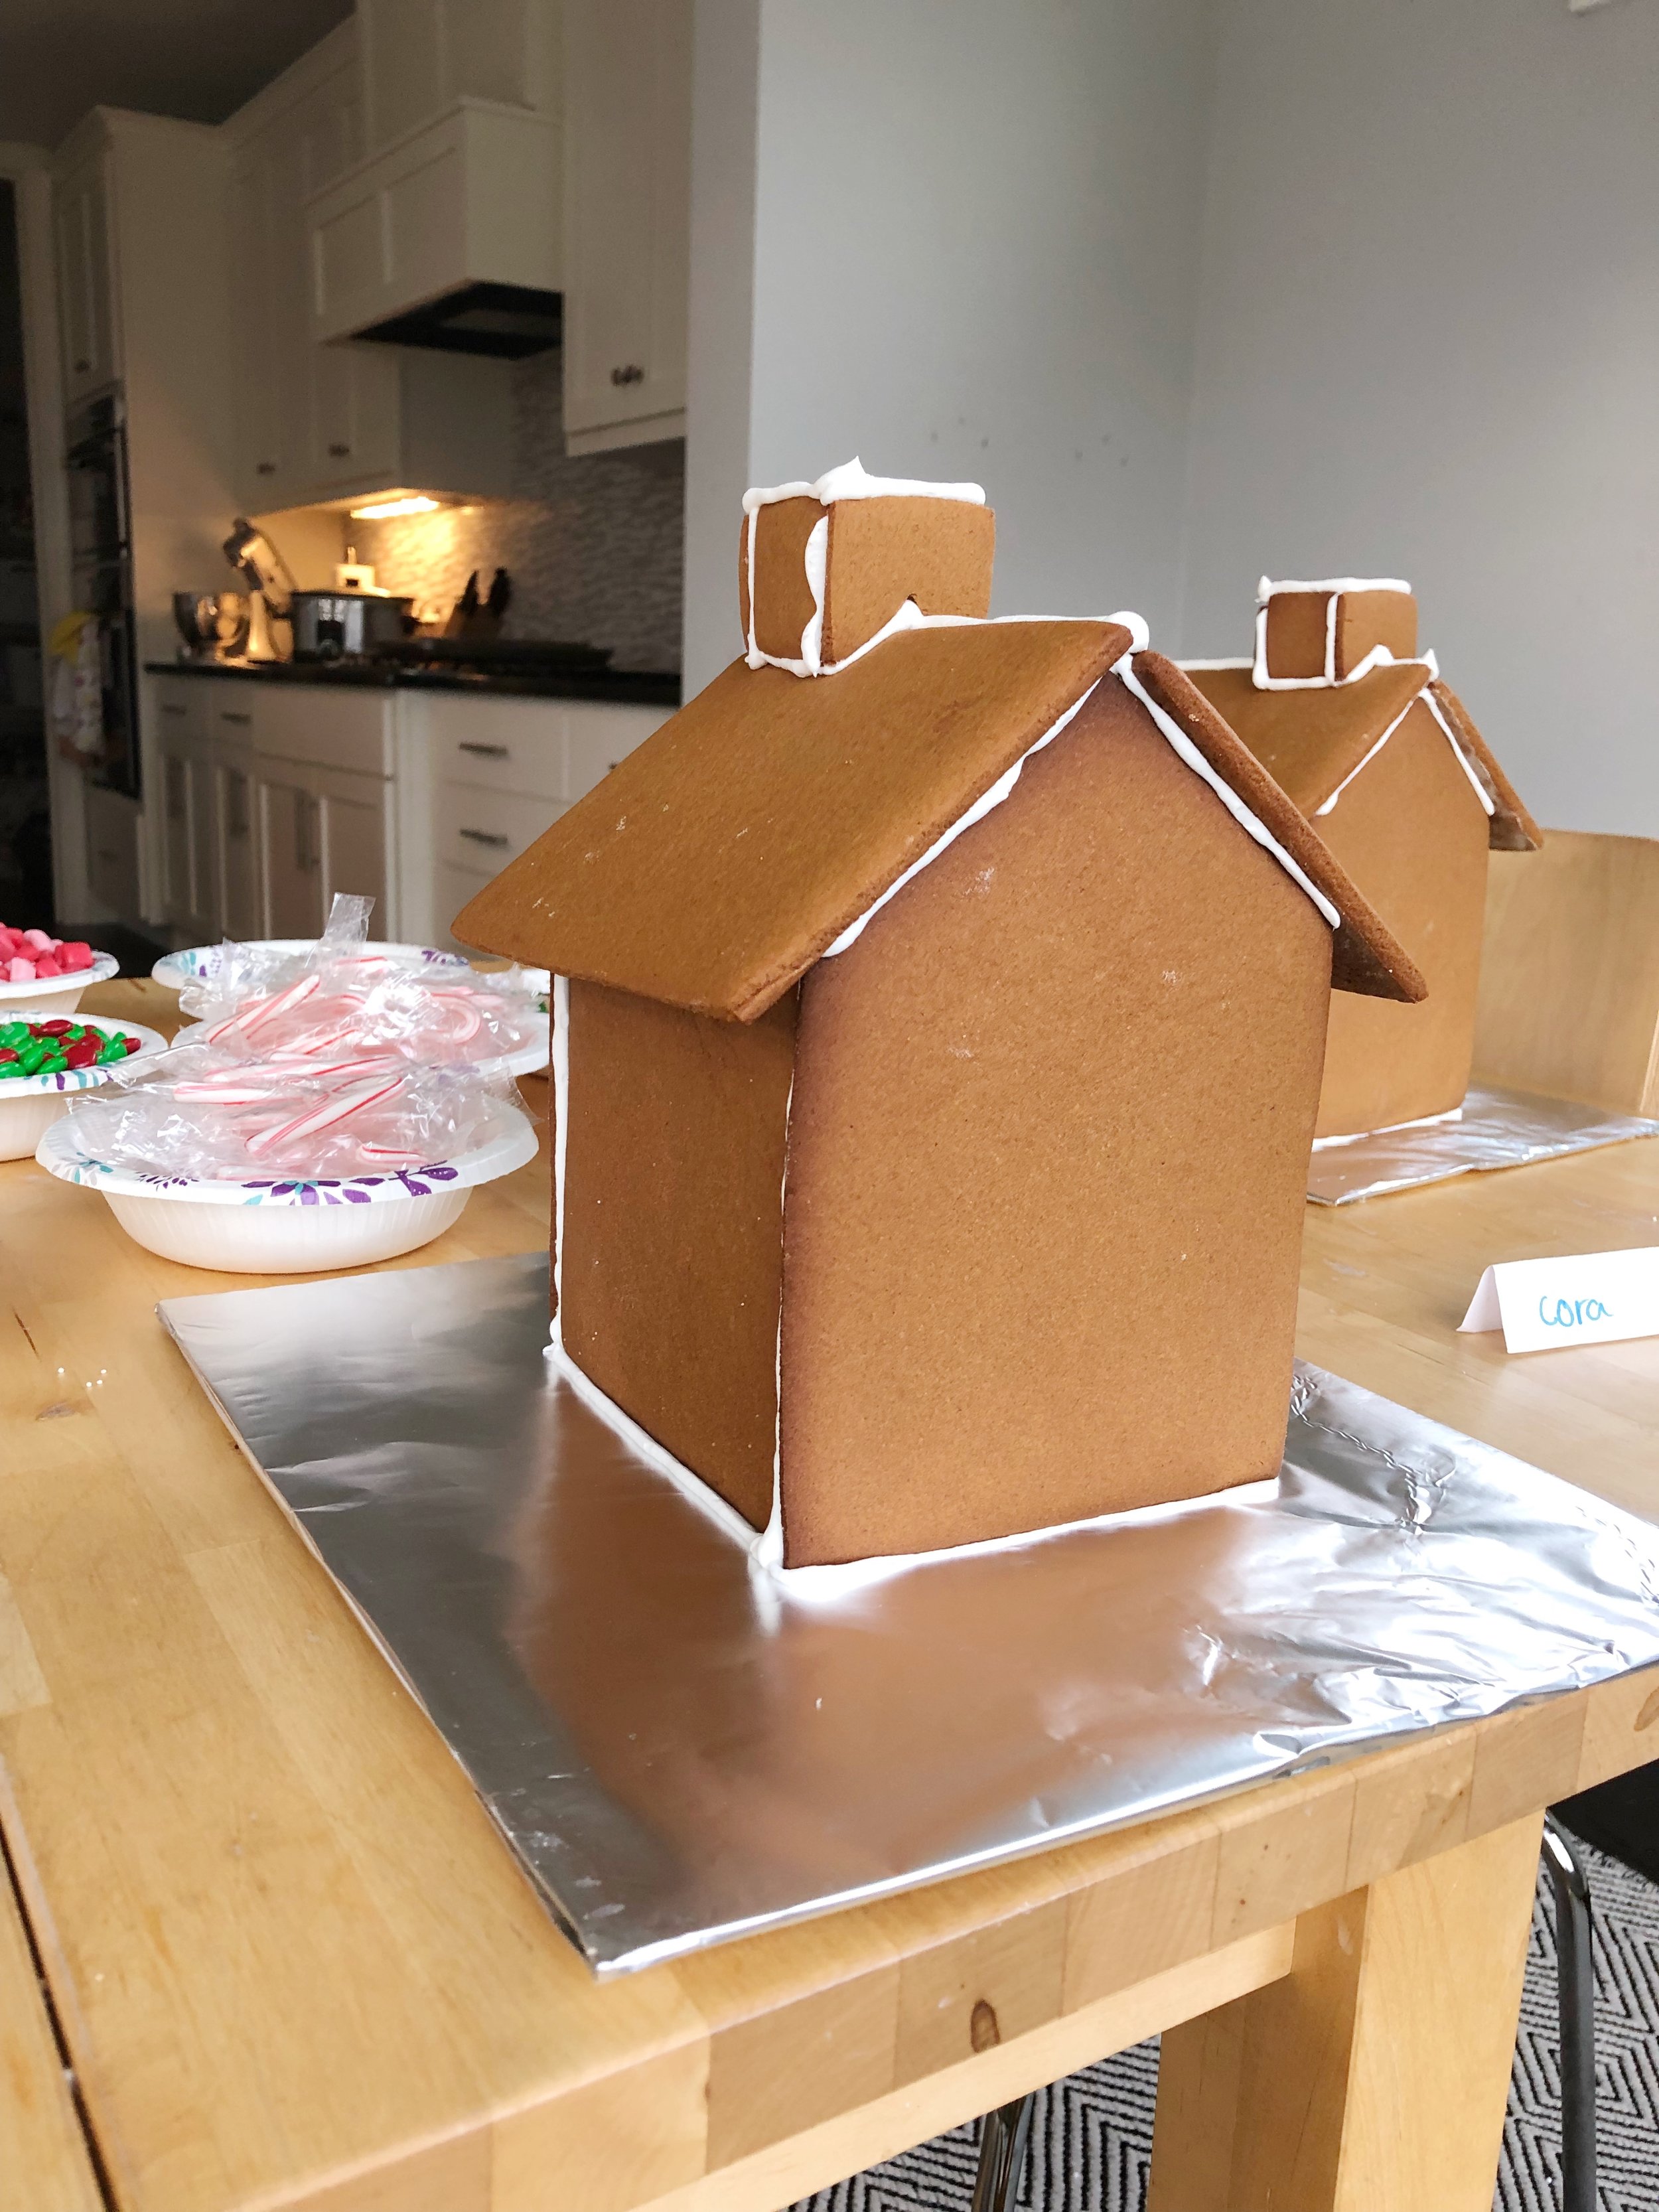 Making gingerbread houses from scratch. Free recipe and template.